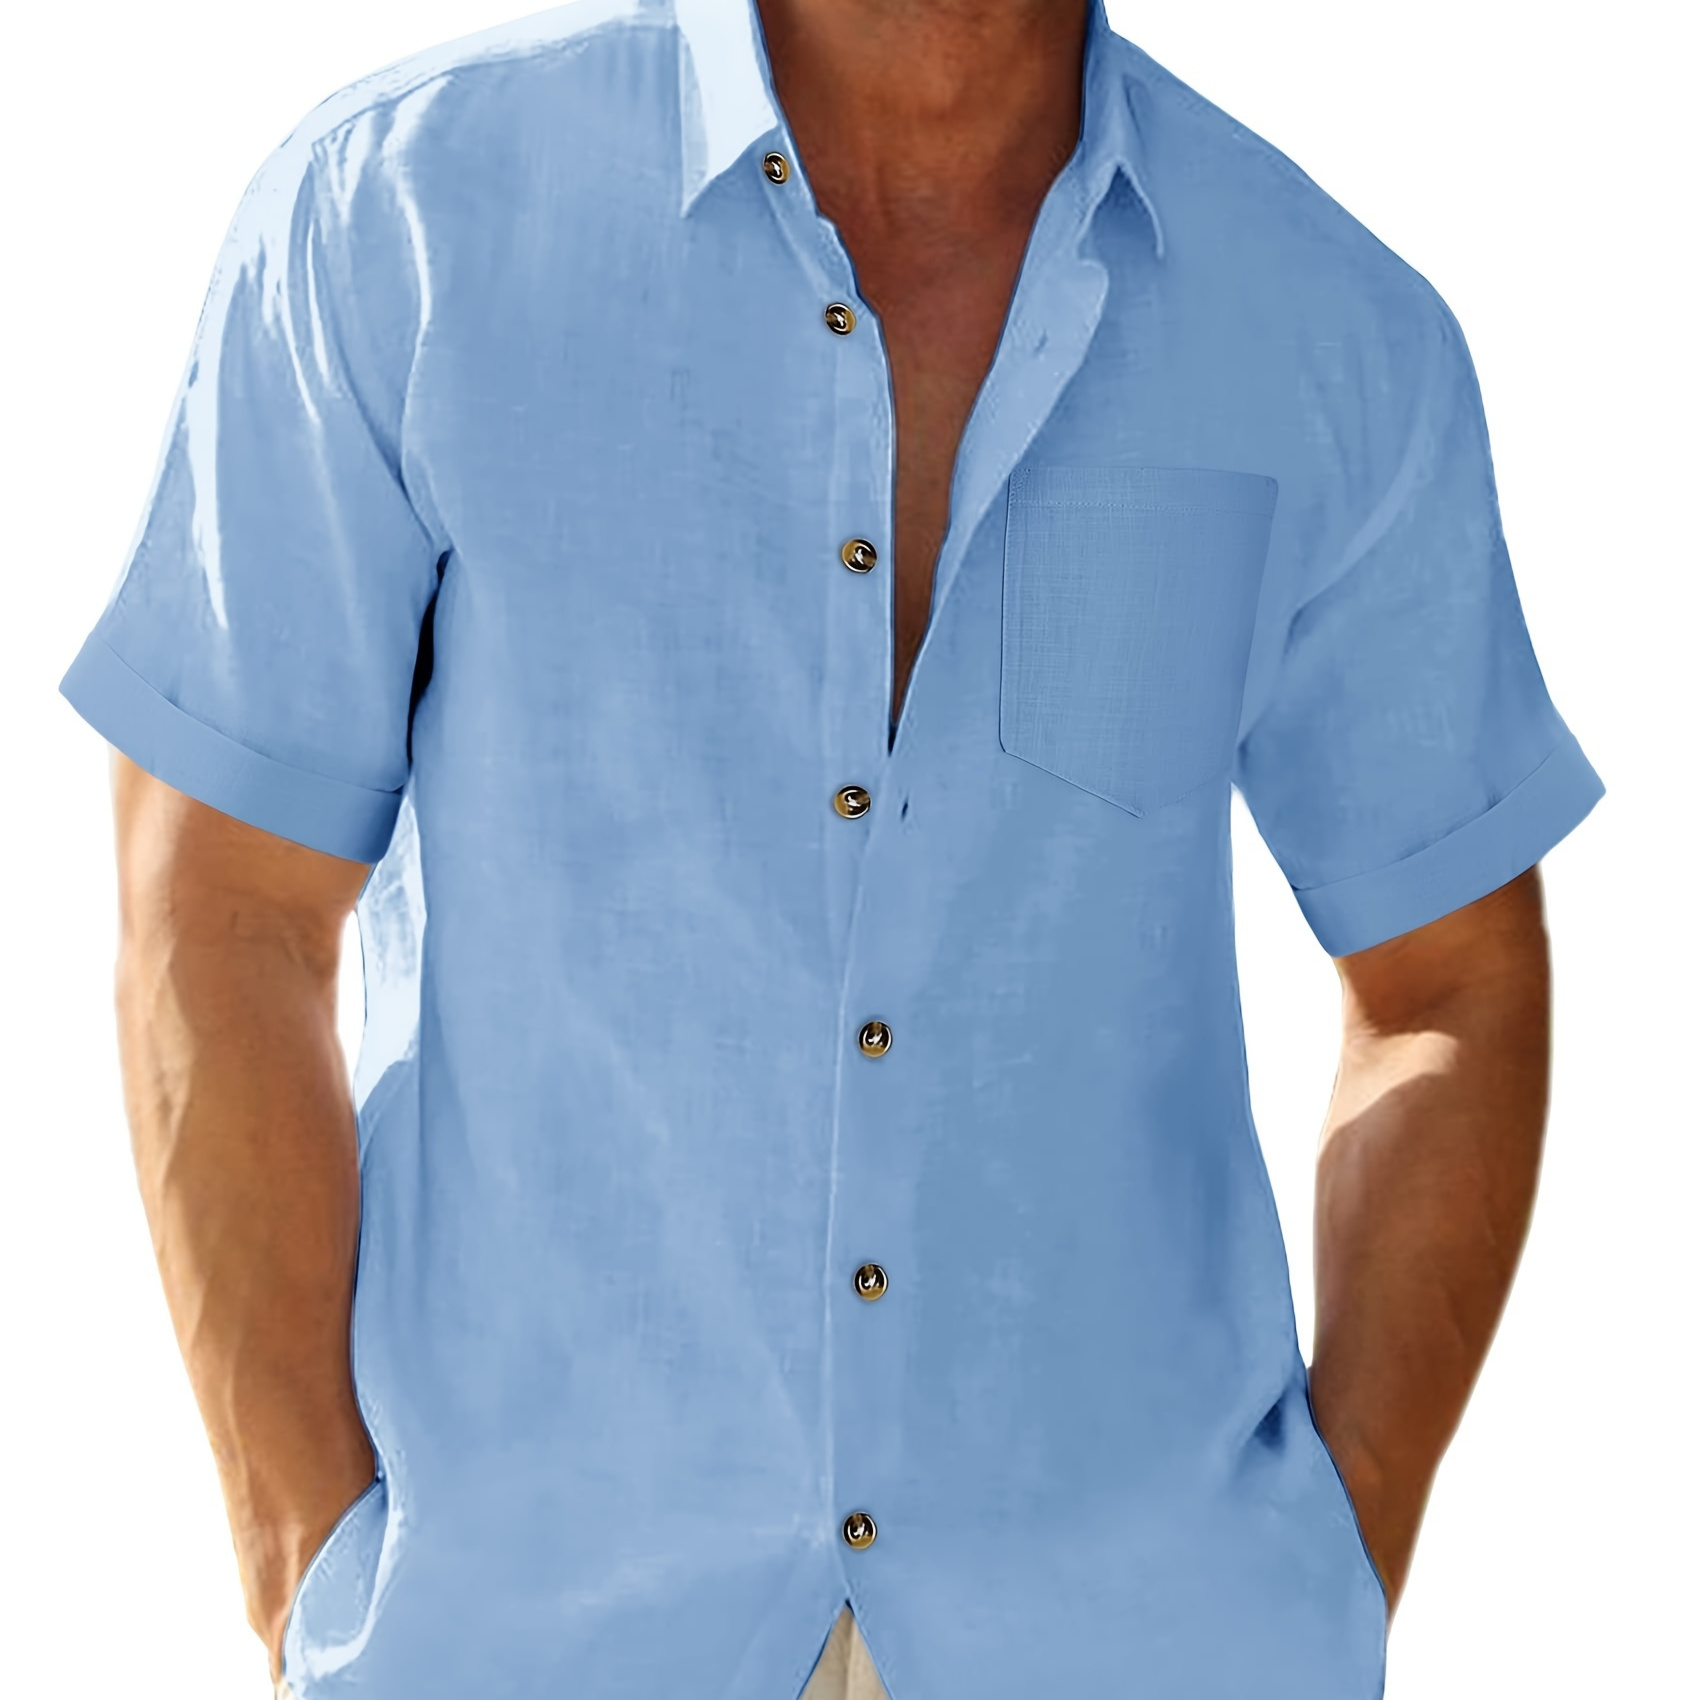 

Plus Size Men's Solid Shirt Fashion Casual Short Sleeve Shirt For Summer, Coquette Style